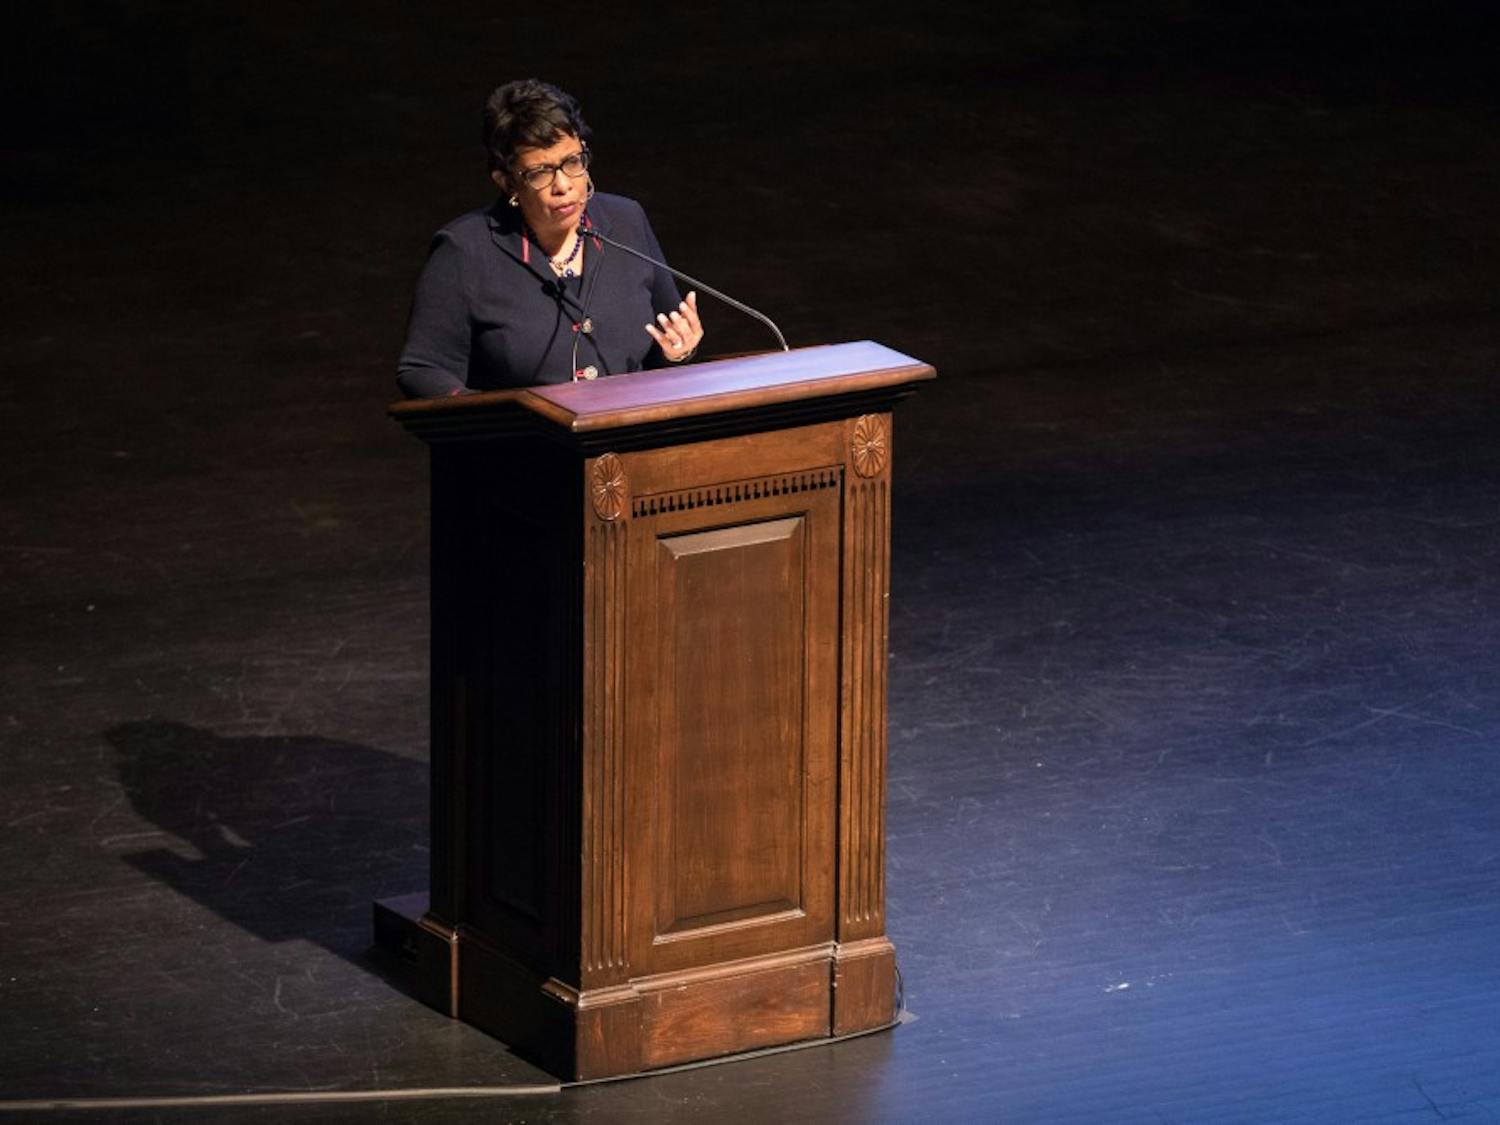 Former US Attorney General Loretta Lynch gives a speech in Memorial Hall on Monday night as part of the 37th annual UNC Martin Luther King Jr. Keynote Lecture and Award Ceremony.